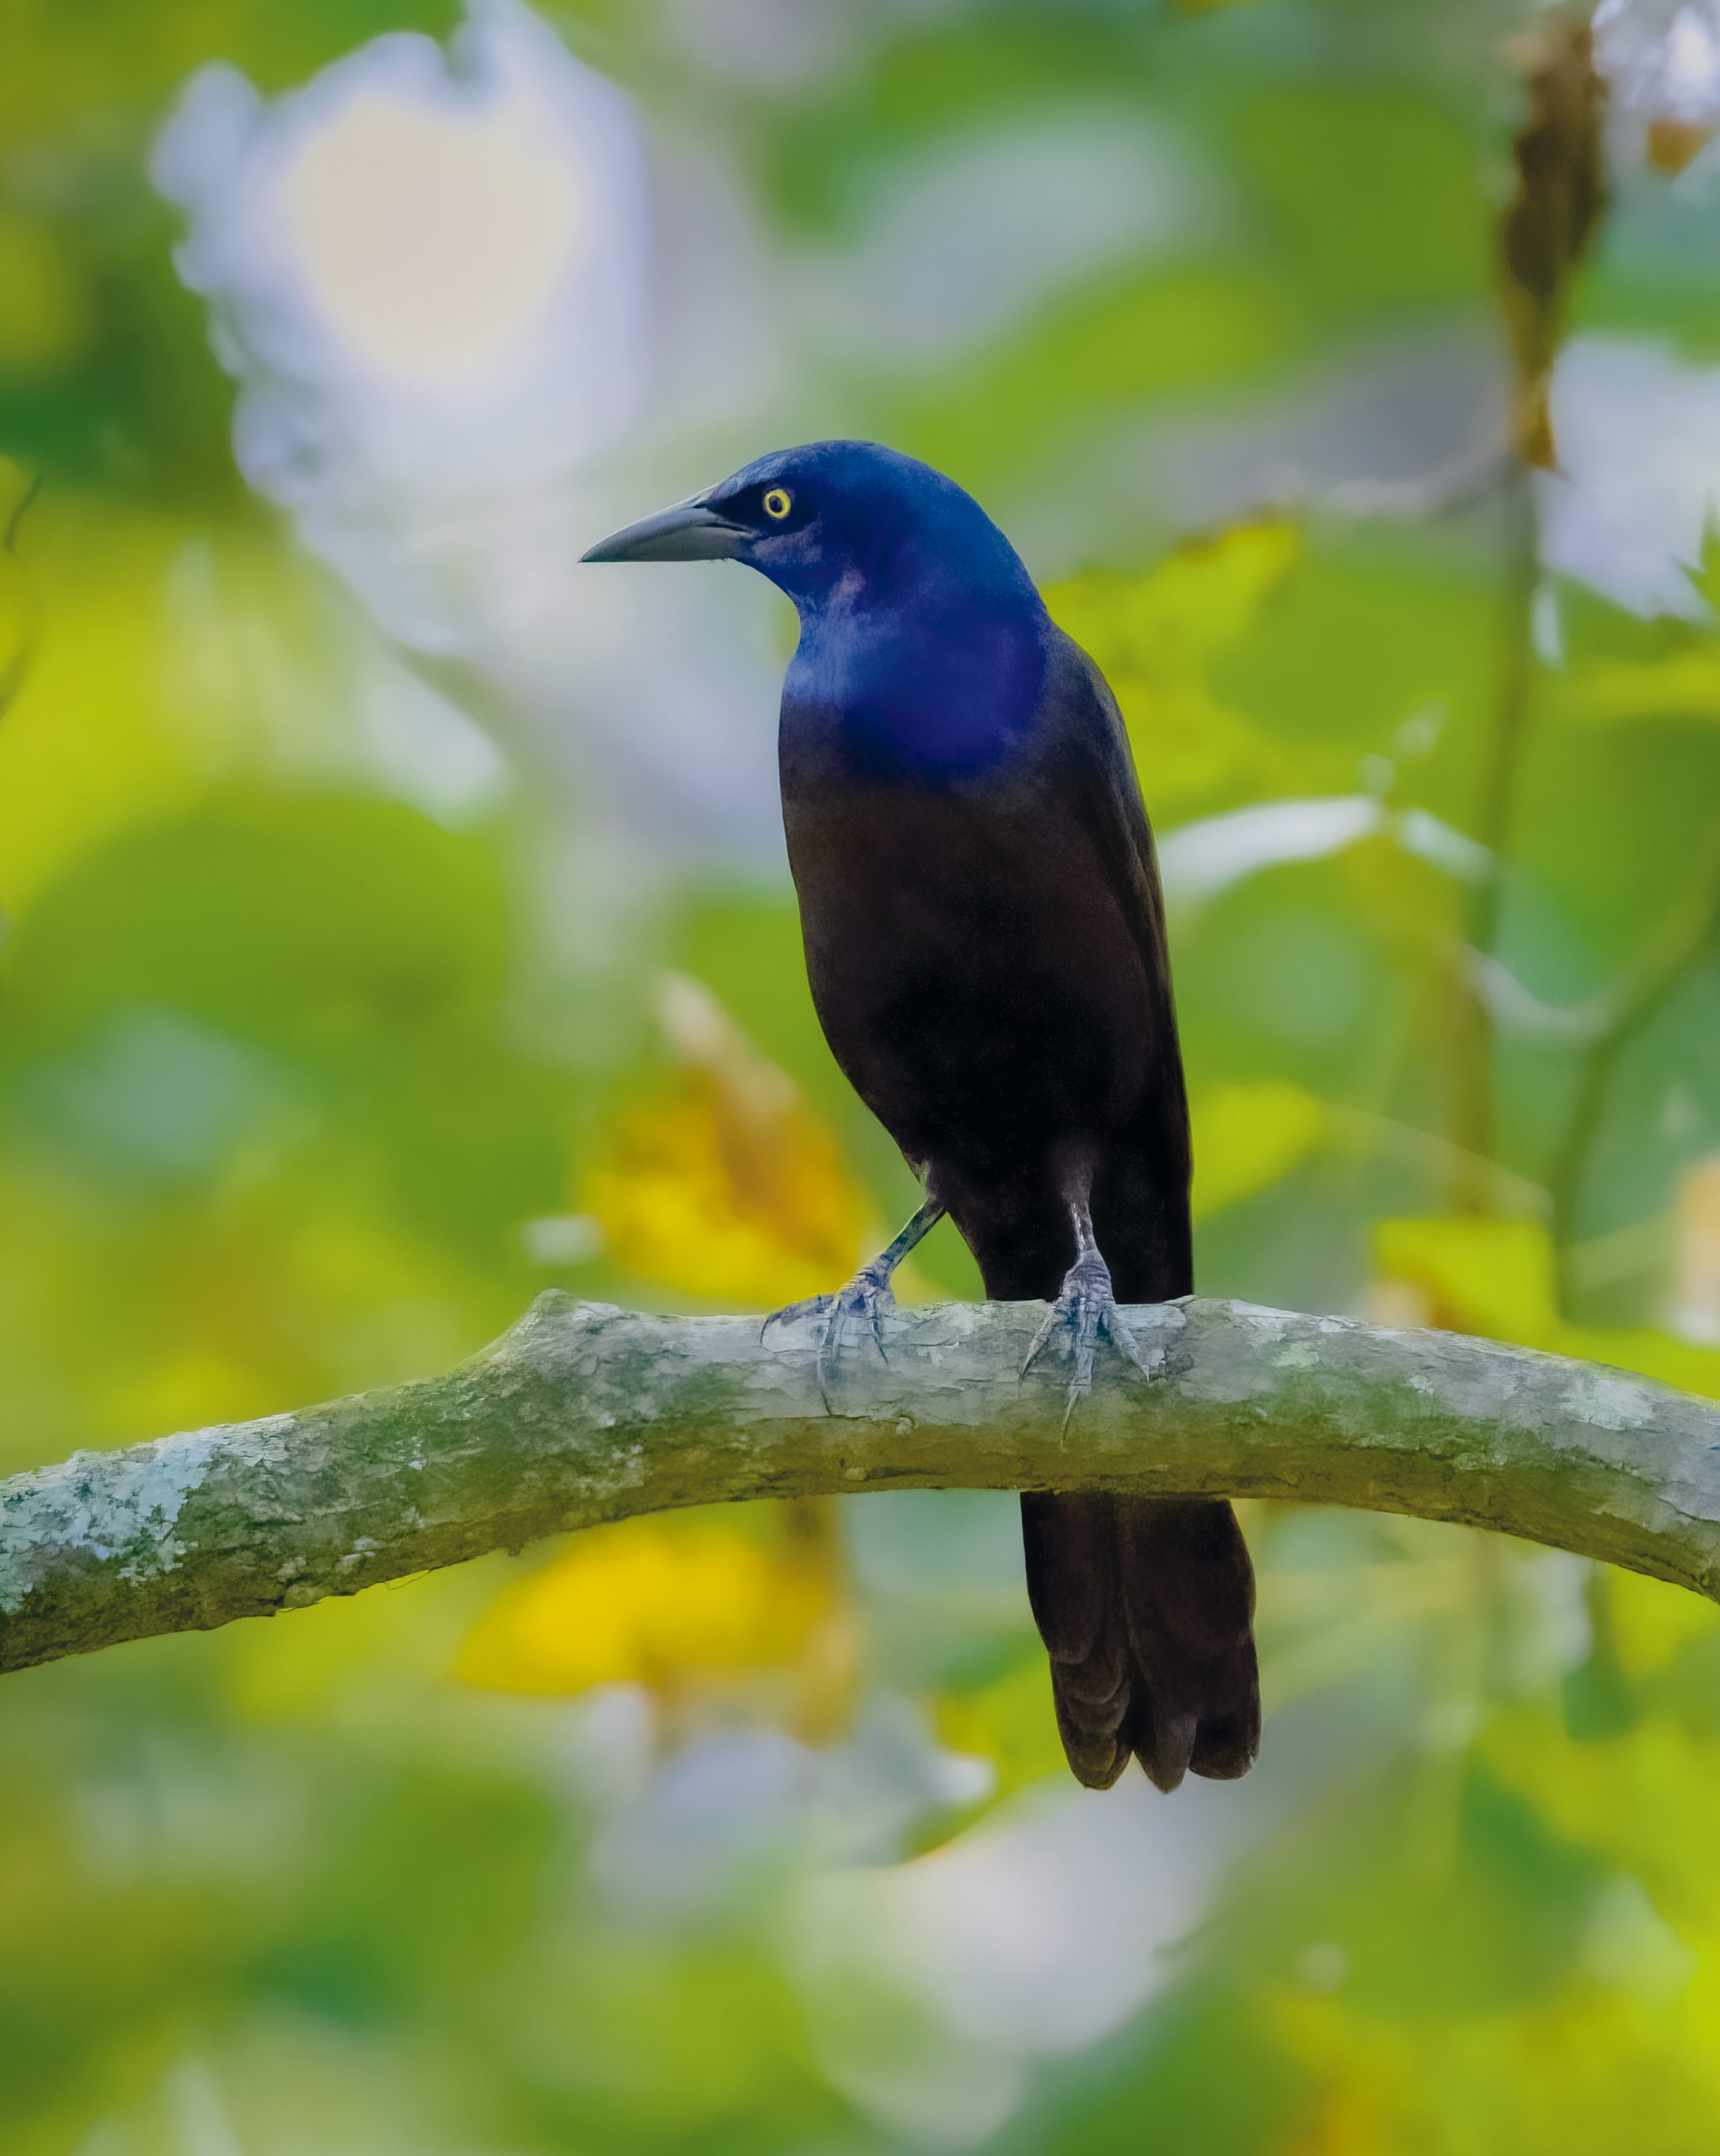 A bit larger than a Blue Jay and smaller than an American Crow, the Common Grackle has natural oils on its feathers that can reflect light in different colors depending on the surroundings and the angle for the reflection. 